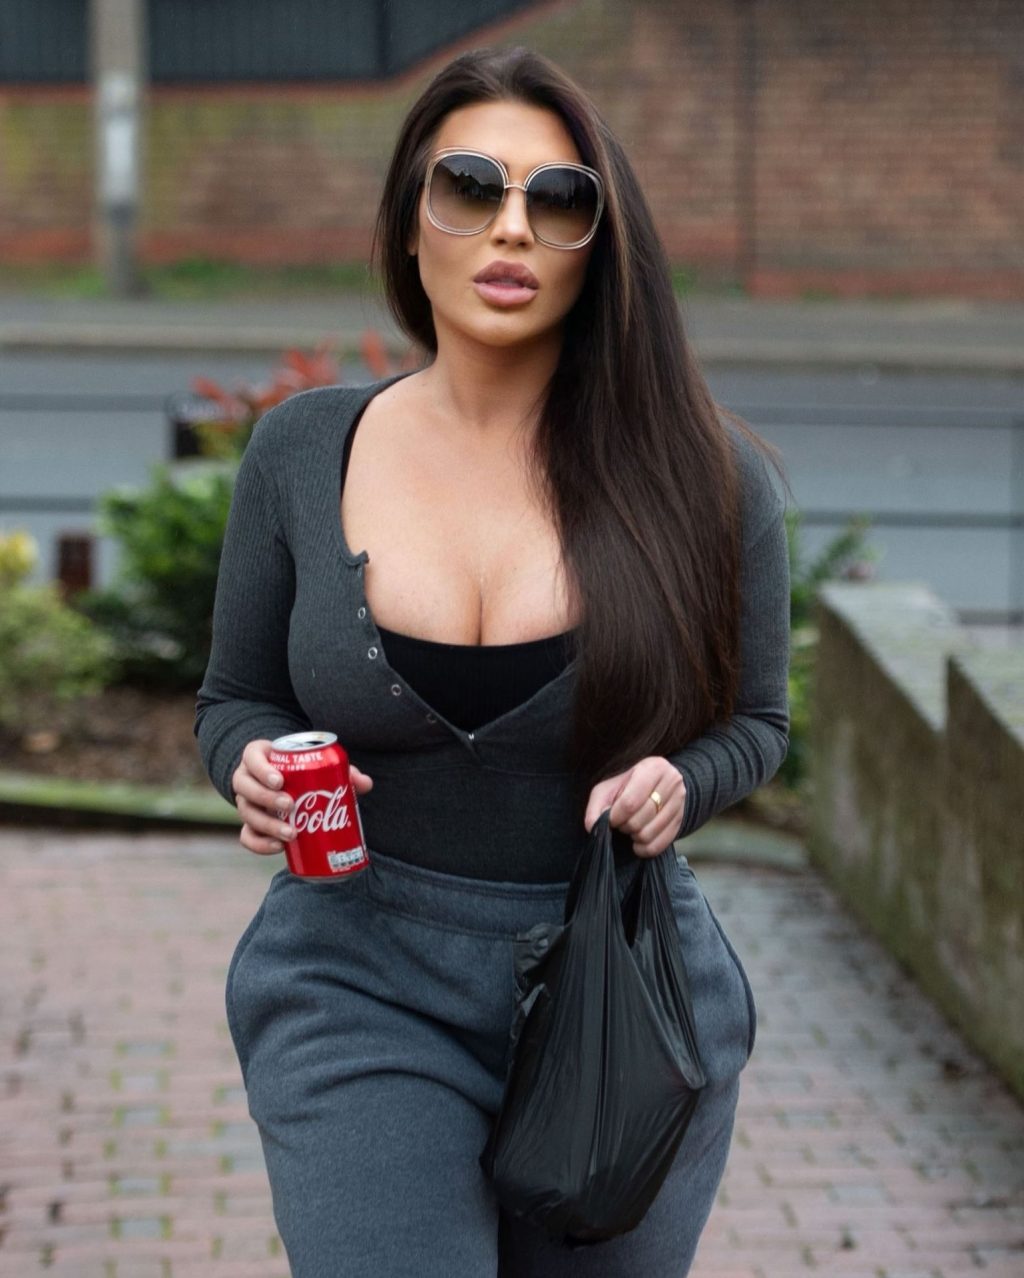 Lauren Goodger Spotted Leaving Her Home Going to Her Local Shops (12 Photos)